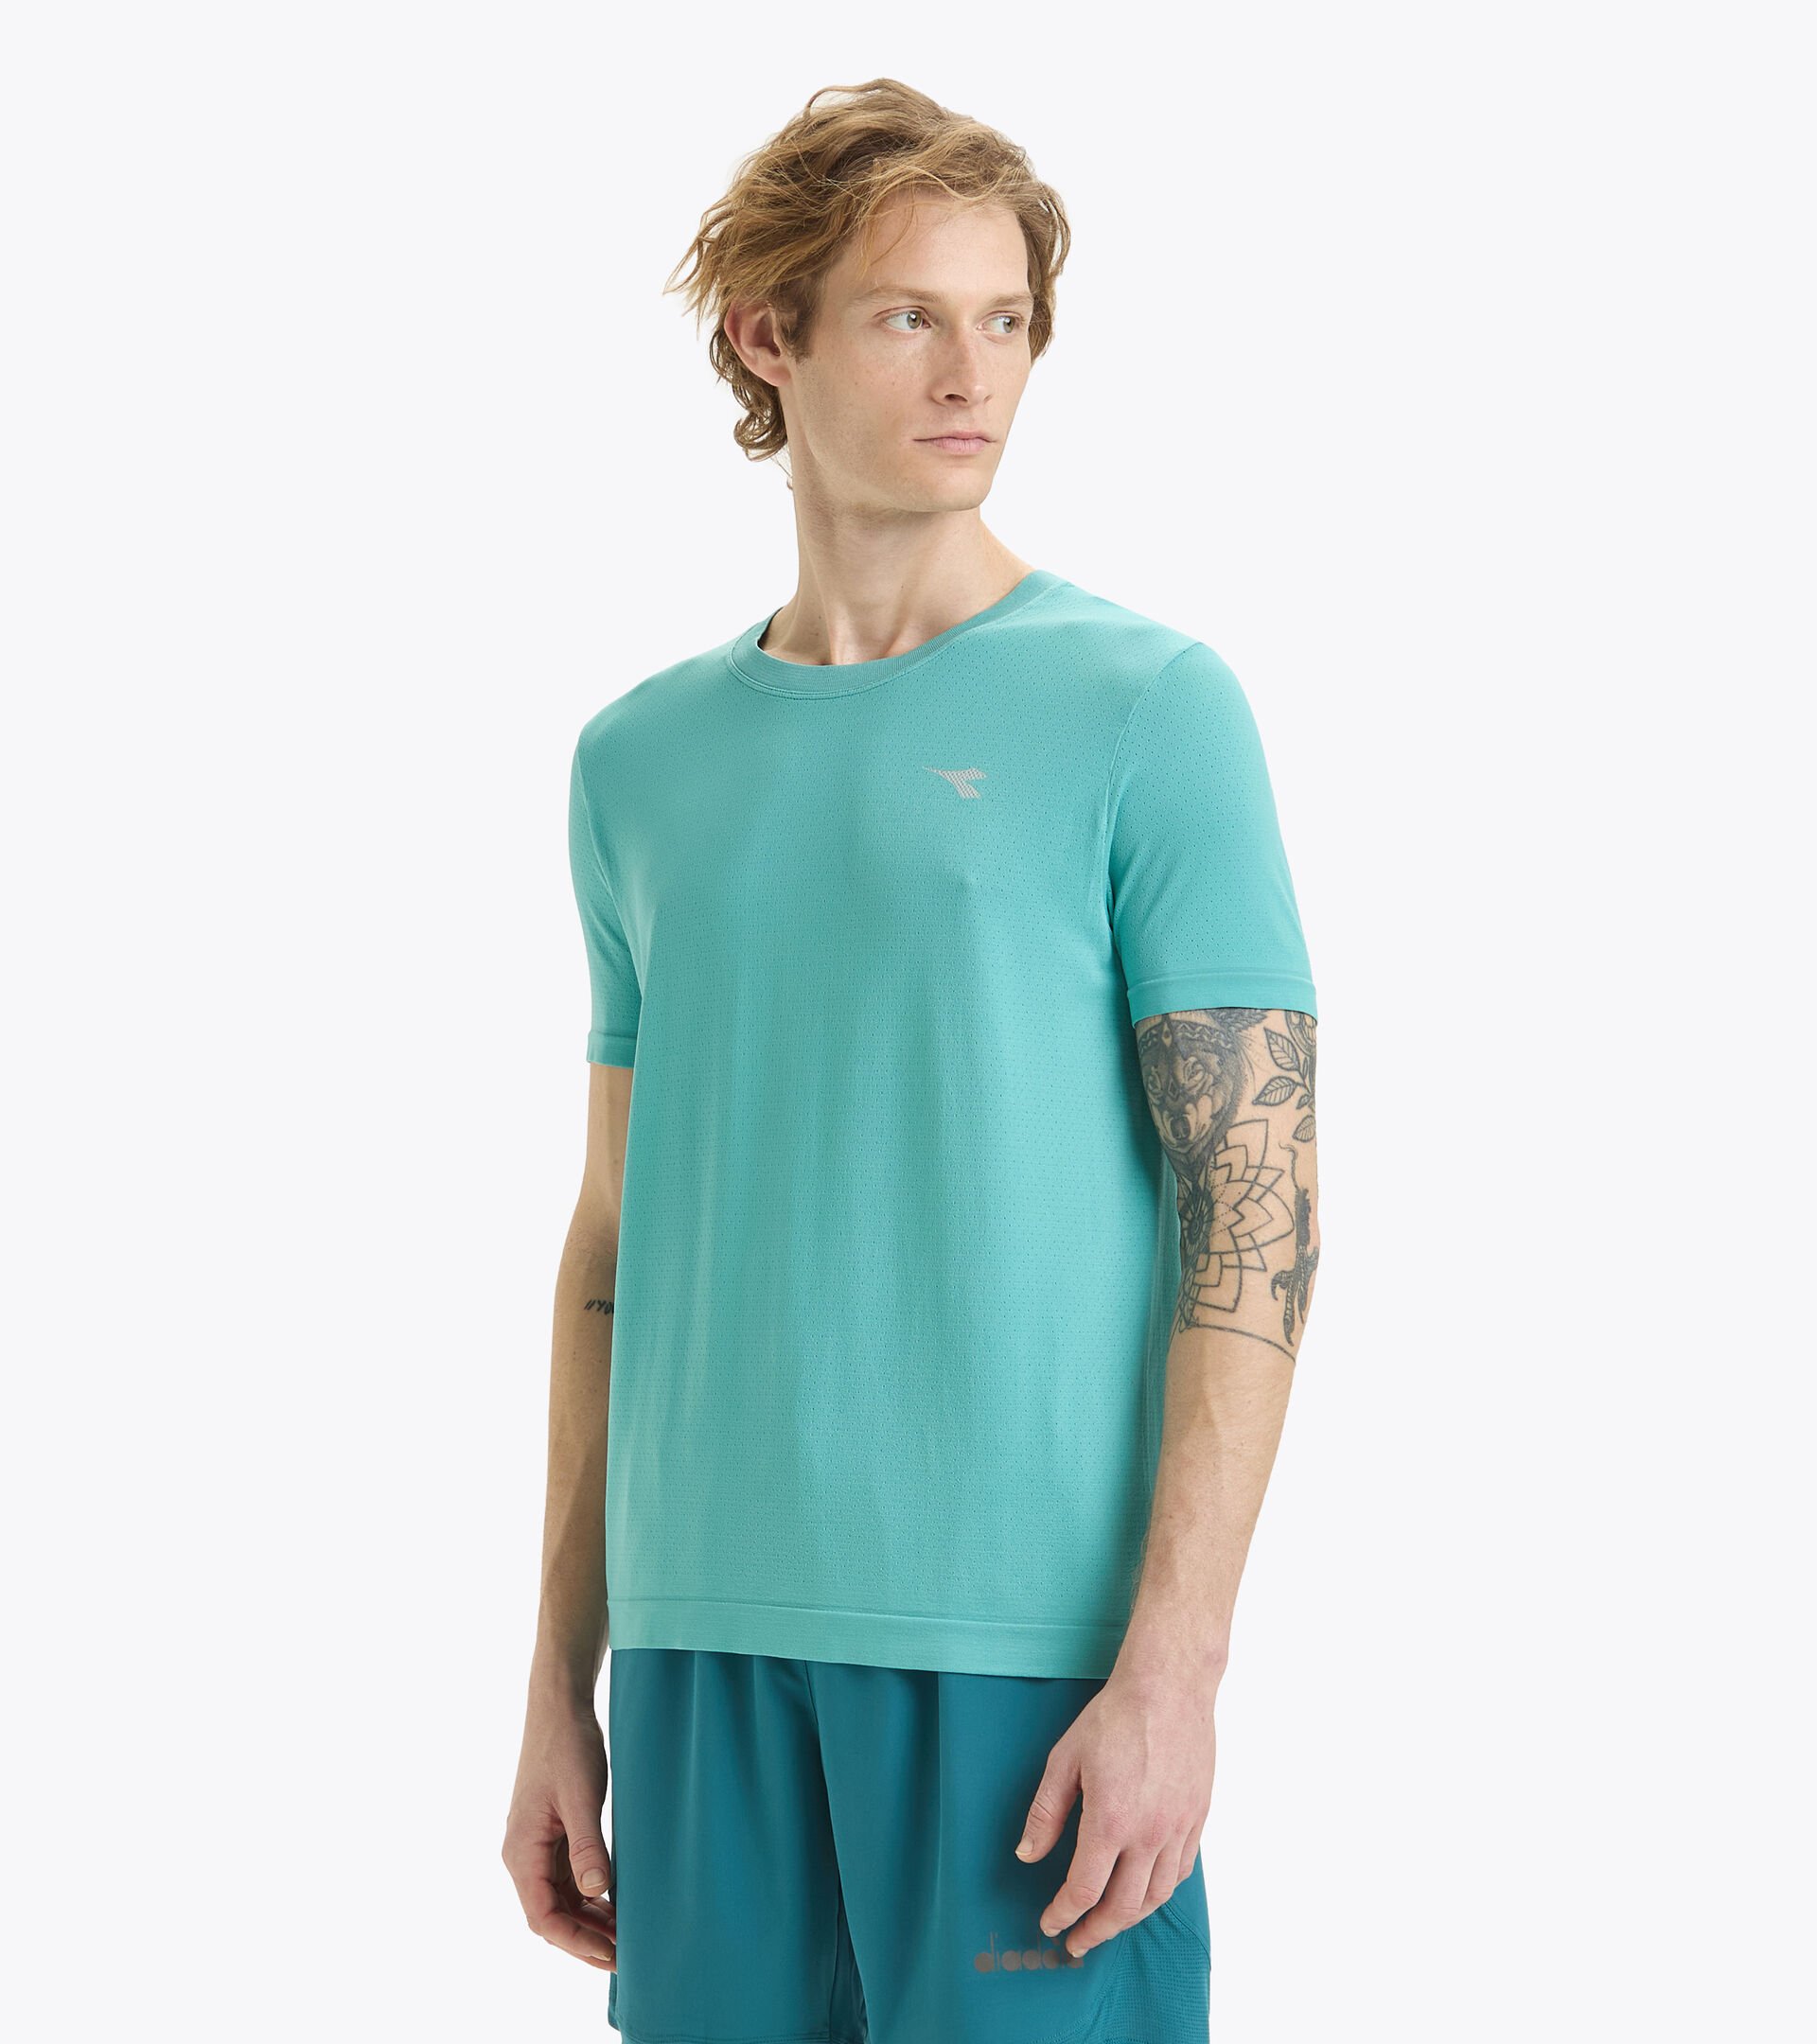 T-shirt de running sans coutures - Made in Italy - Homme SS T-SHIRT SKIN FRIENDLY DUSTY TURQUOISE - Diadora